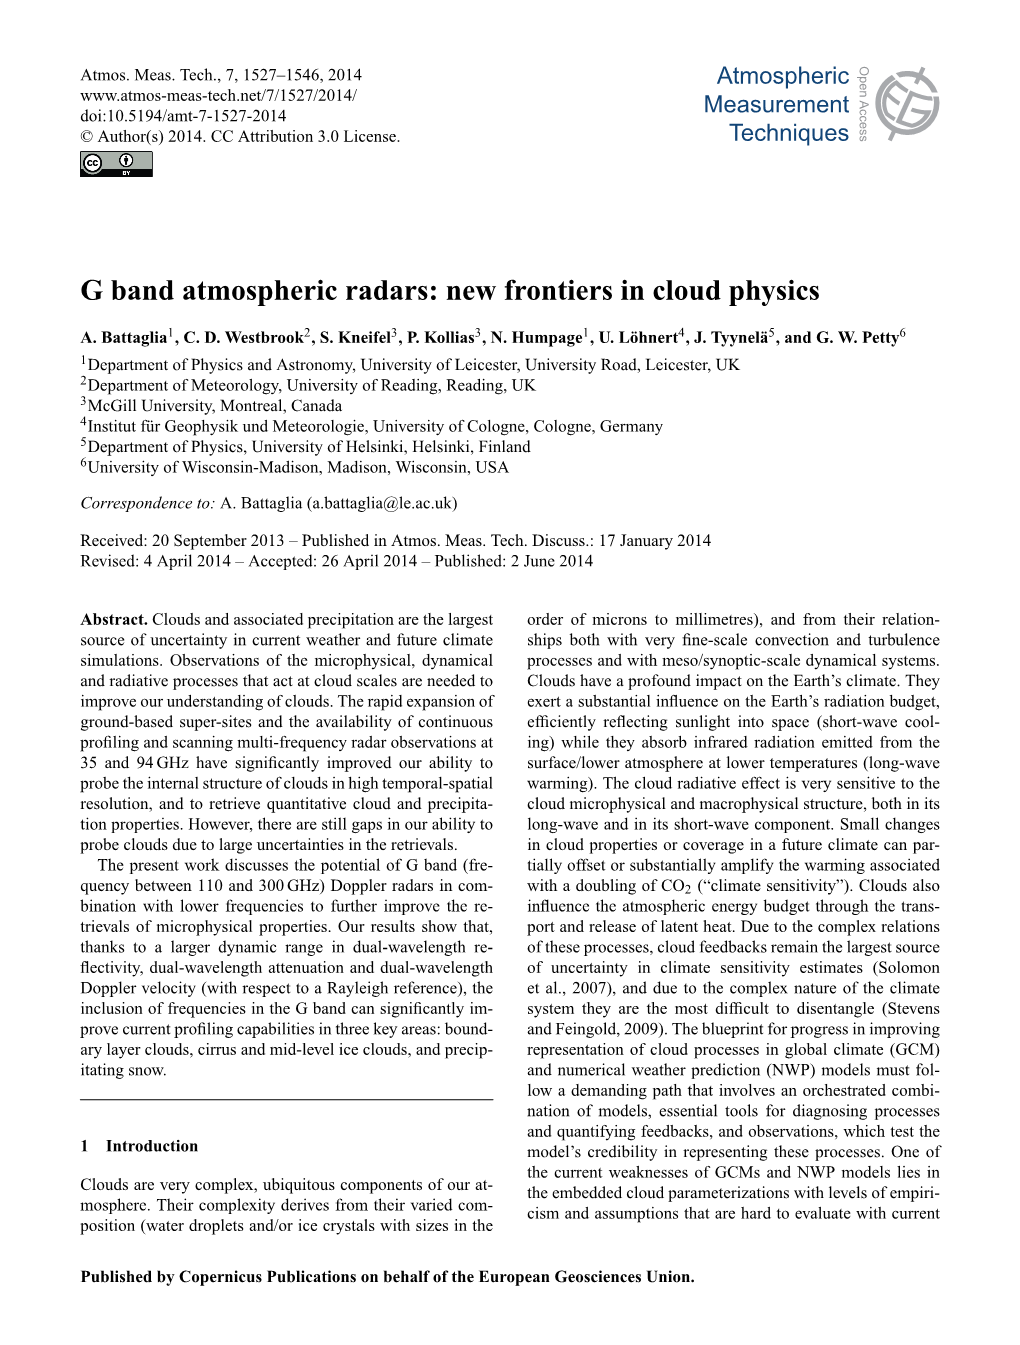 G Band Atmospheric Radars: New Frontiers in Cloud Physics